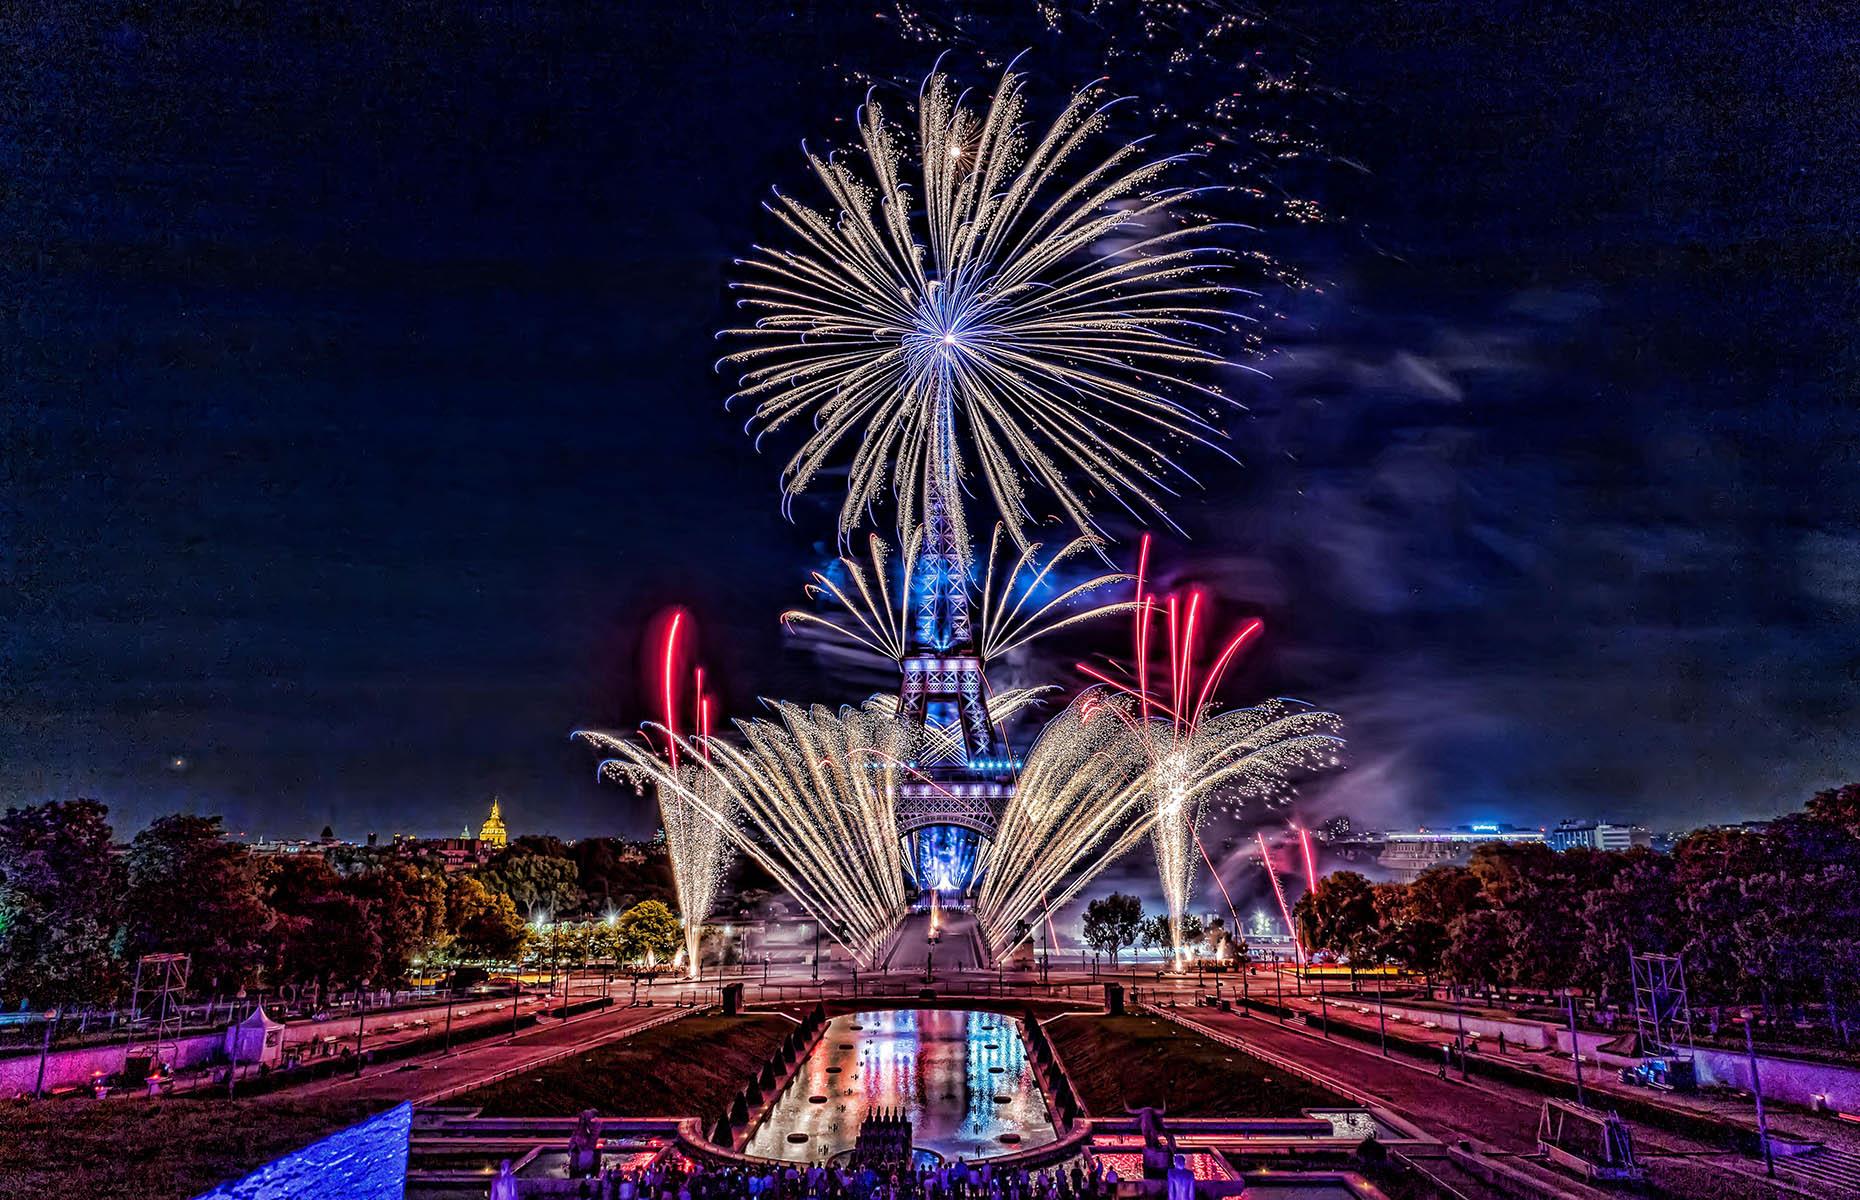 <p>In 2019, the Eiffel Tower celebrated its 130th birthday – not a bad run for an iron tower only meant to stand for 20 years. Over that time it has become a beloved icon, not just in France but around the world. It remains, however, a focal point for Paris and France; a place where spectacular fireworks herald in the new year and gorgeous themed illuminations celebrate everything from World Cups and Olympics to the European Union. Here’s to the next 130 years...</p>  <p><strong>Liked this? Click on the Follow button above for more great stories from loveEXPLORING</strong></p>  <p><strong><a href="https://www.loveexploring.com/galleries/198453/the-fascinating-story-and-secrets-of-the-hollywood-sign?page=1">Now discover the incredible story behind another icon, the Hollywood sign</a></strong></p>